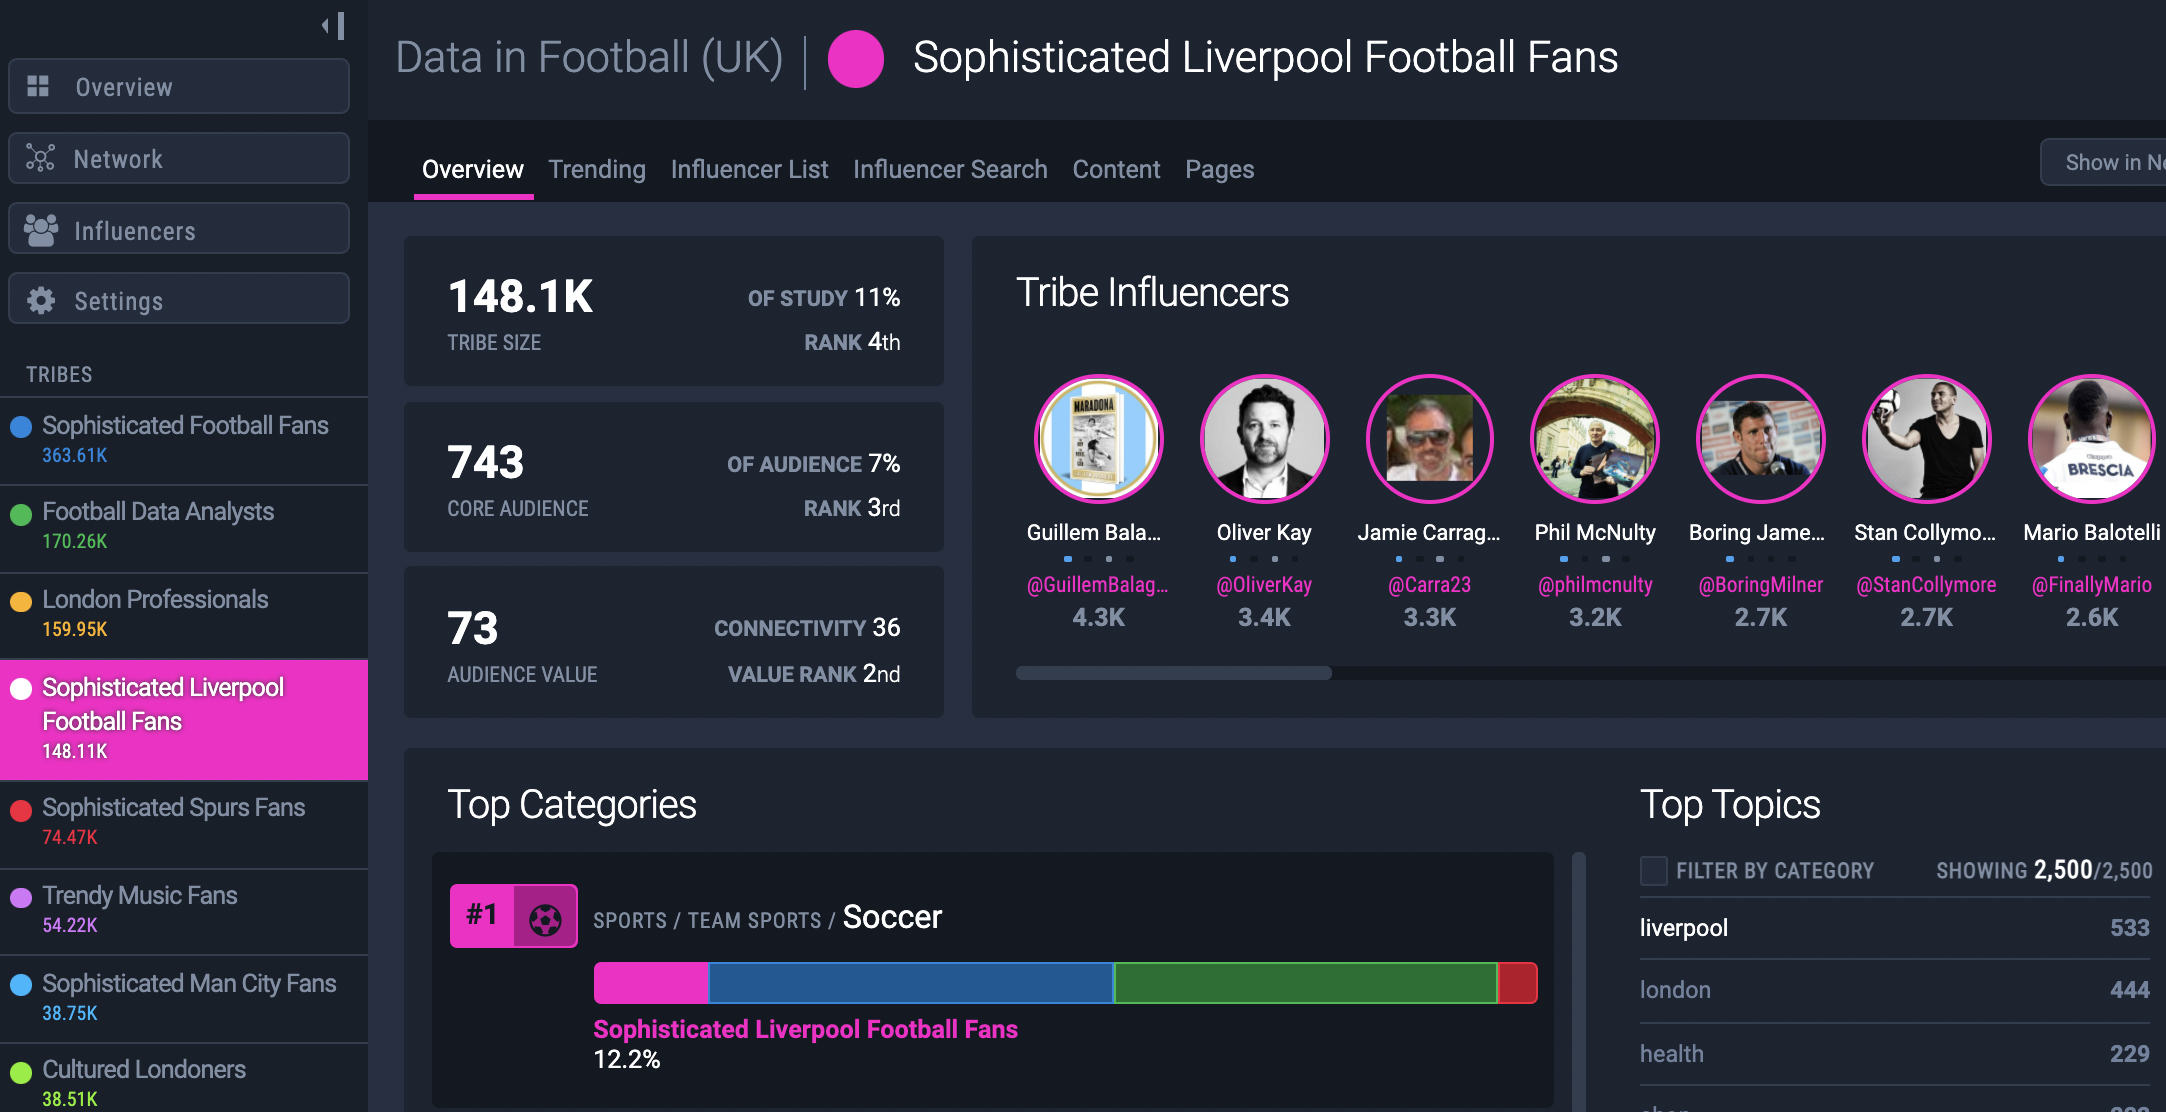 Sophisticated Liverpool Football Fans, a key audience driving football's data revolution.